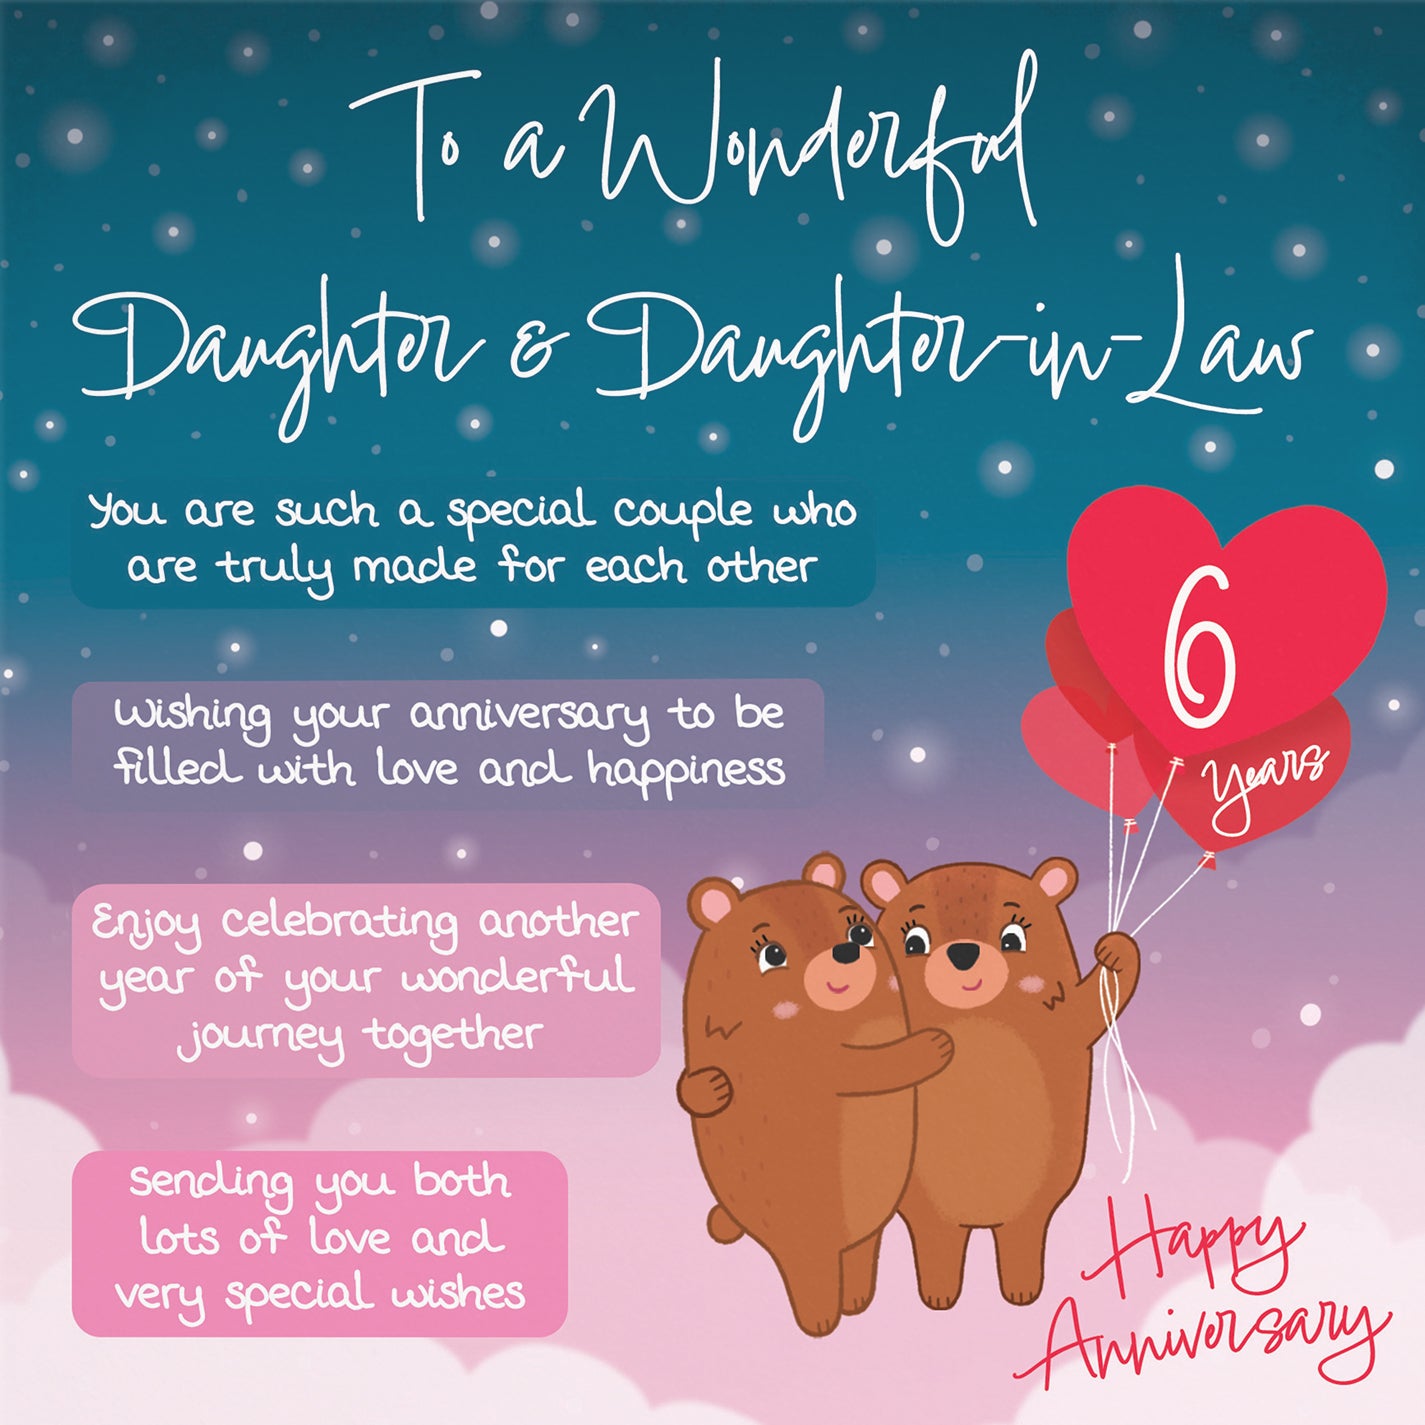 Daughter And Daughter In Law 6th Anniversary Card Starry Night Cute Bears